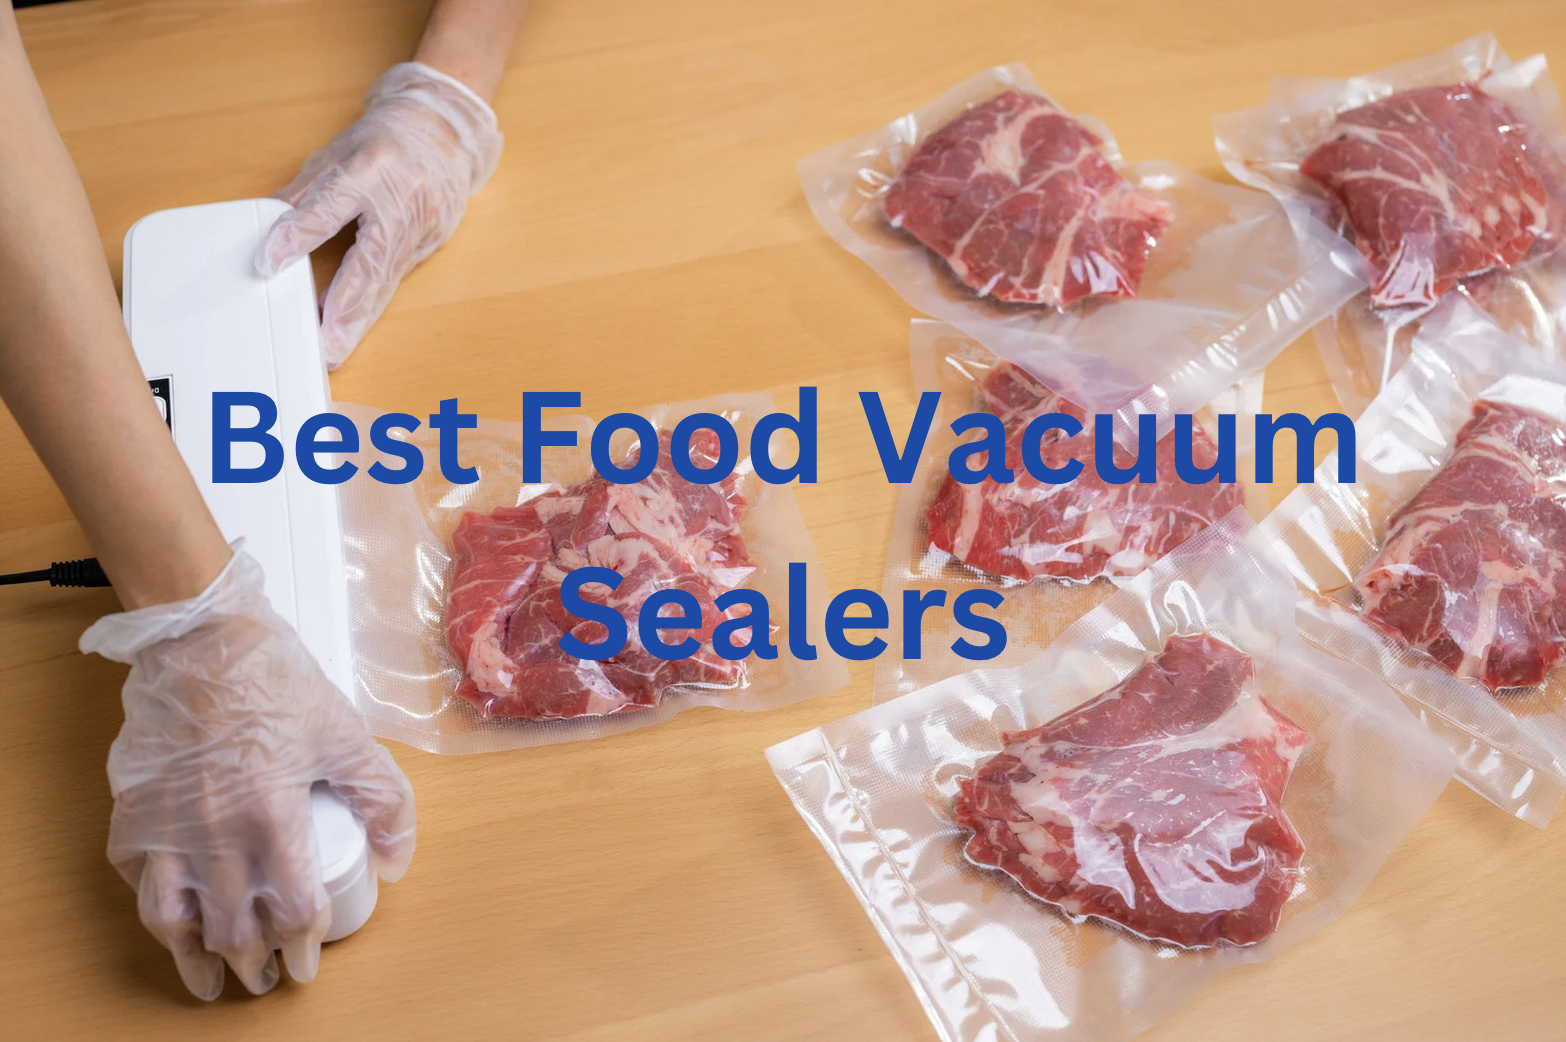 https://groups.google.com/a/seoconsultinggroup.com/group/best-food-vacuum-sealers/attach/3a52fc7f8cda1/Best%20Food%20Vacuum%20Sealer.png?part=0.6&view=1